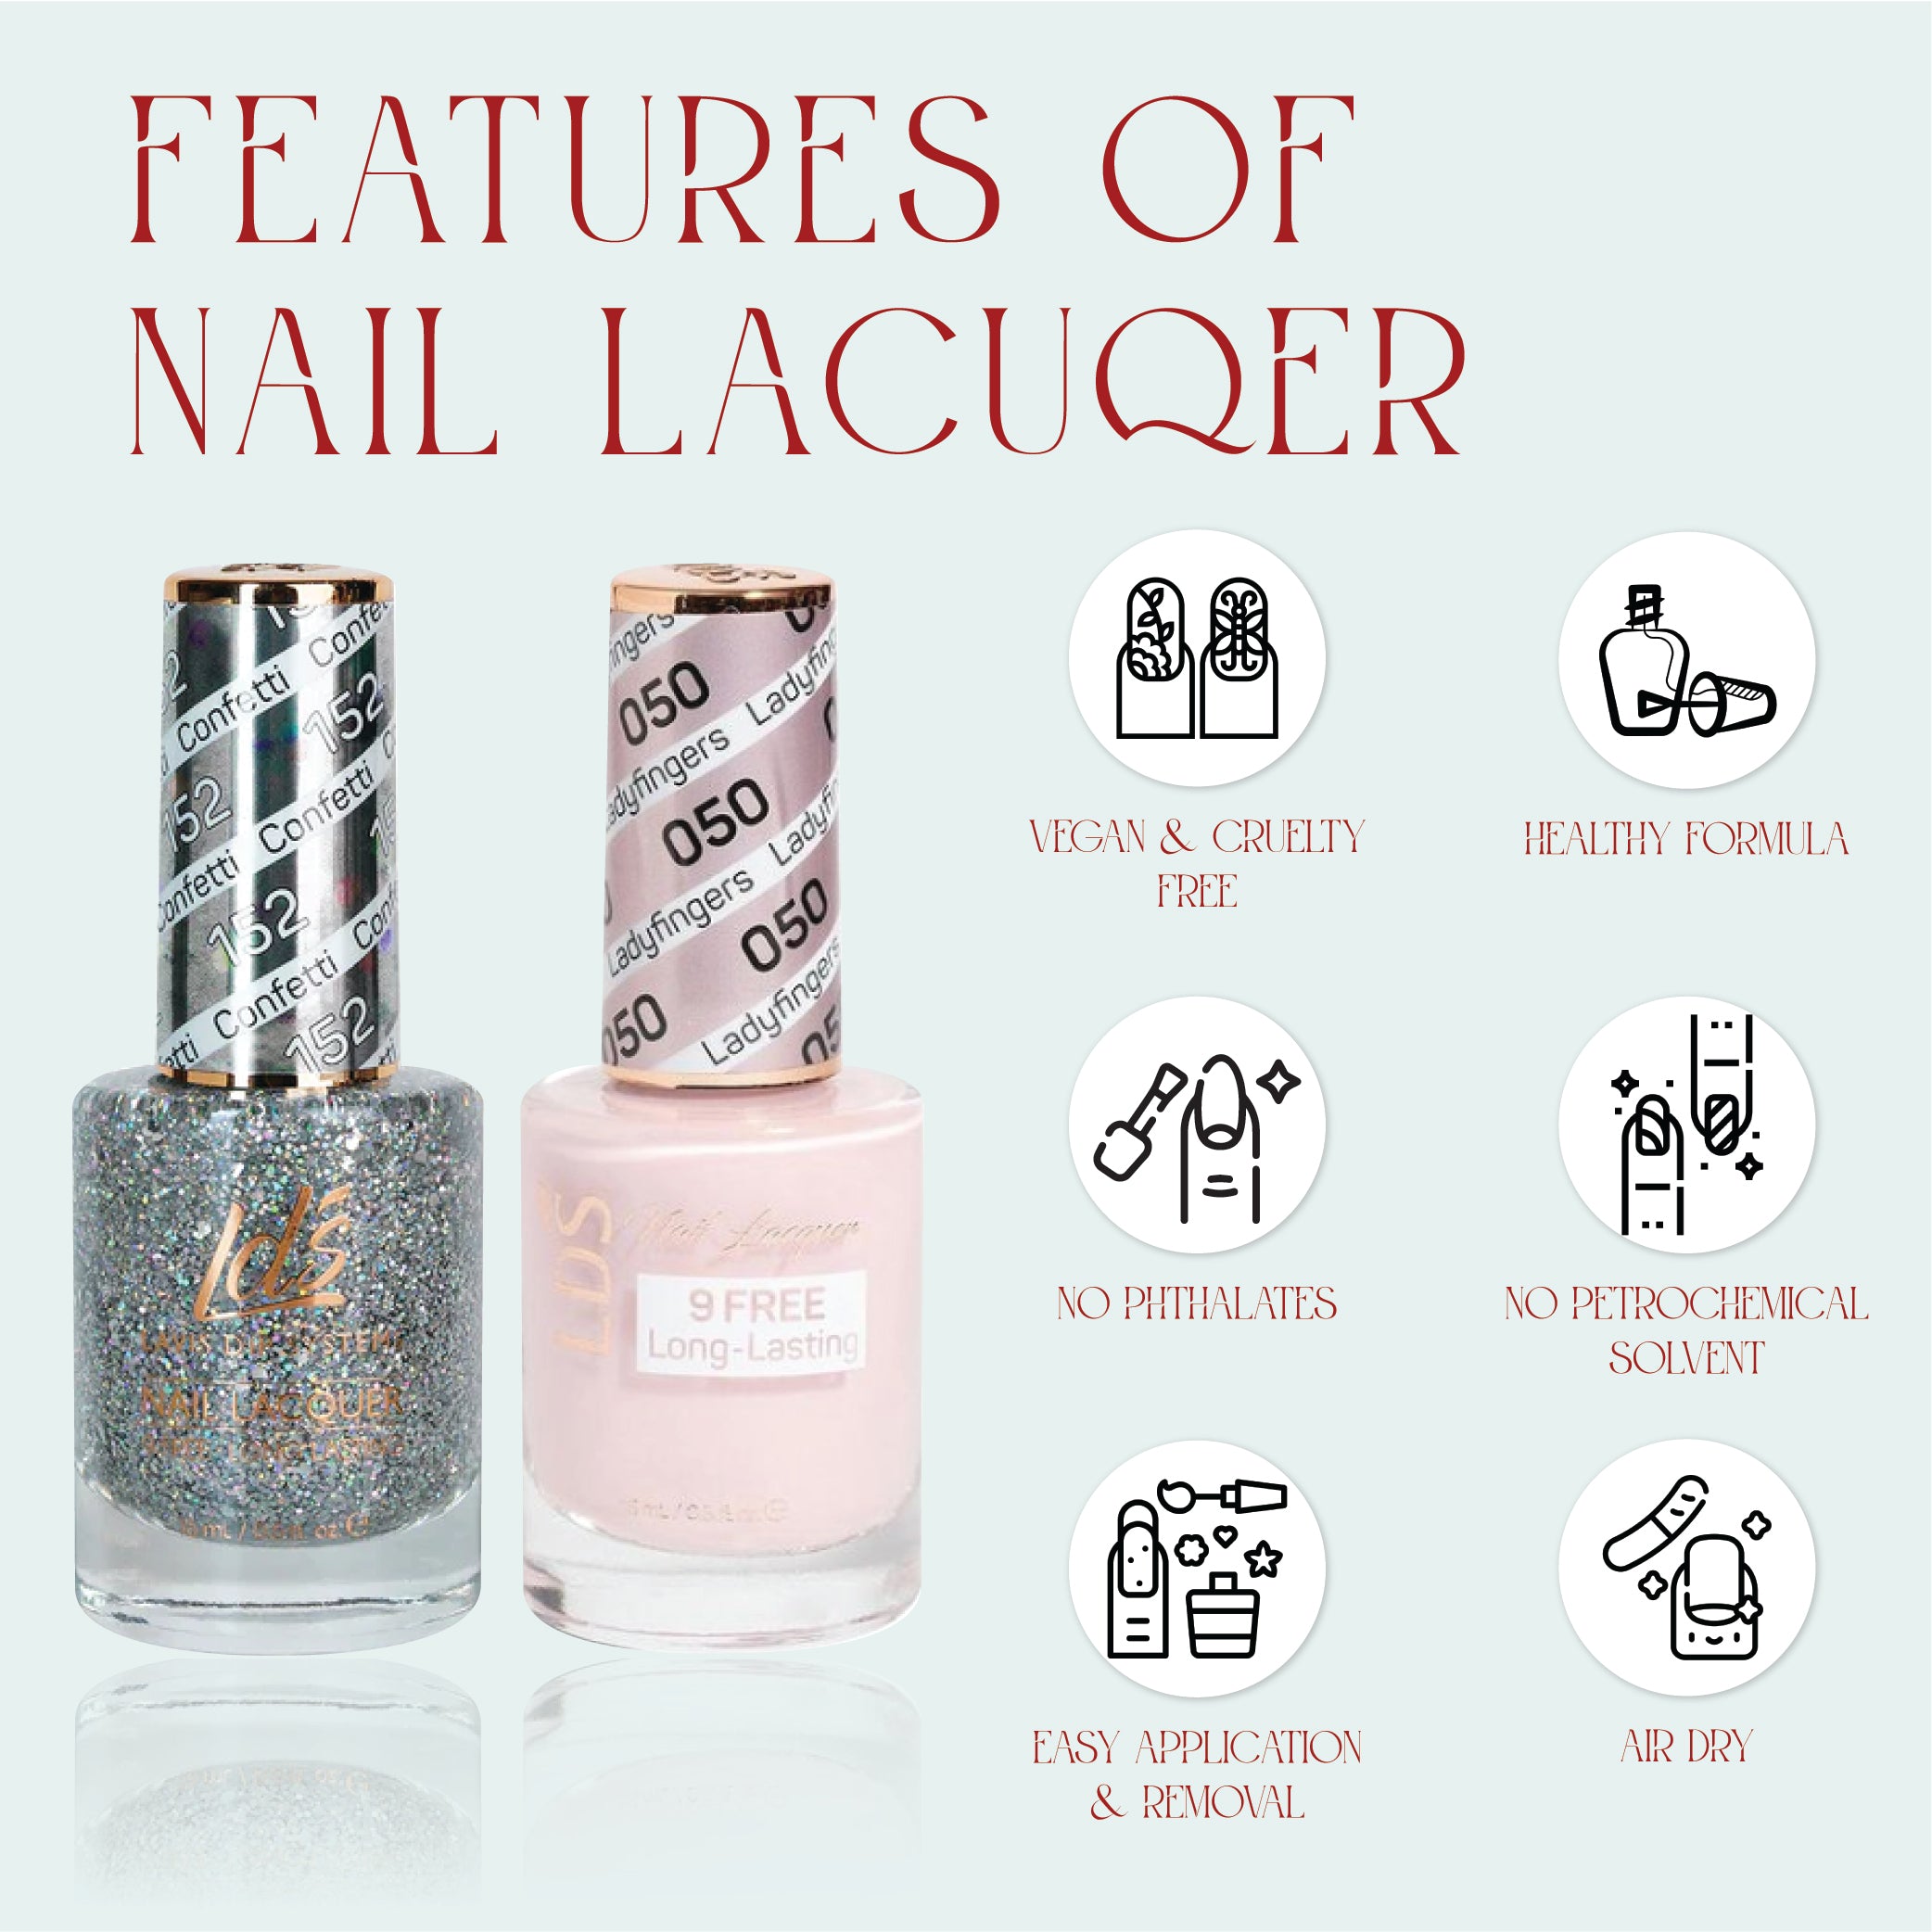 LDS Gel Nail Polish Duo - 144 Pink Colors - Birthday Cake